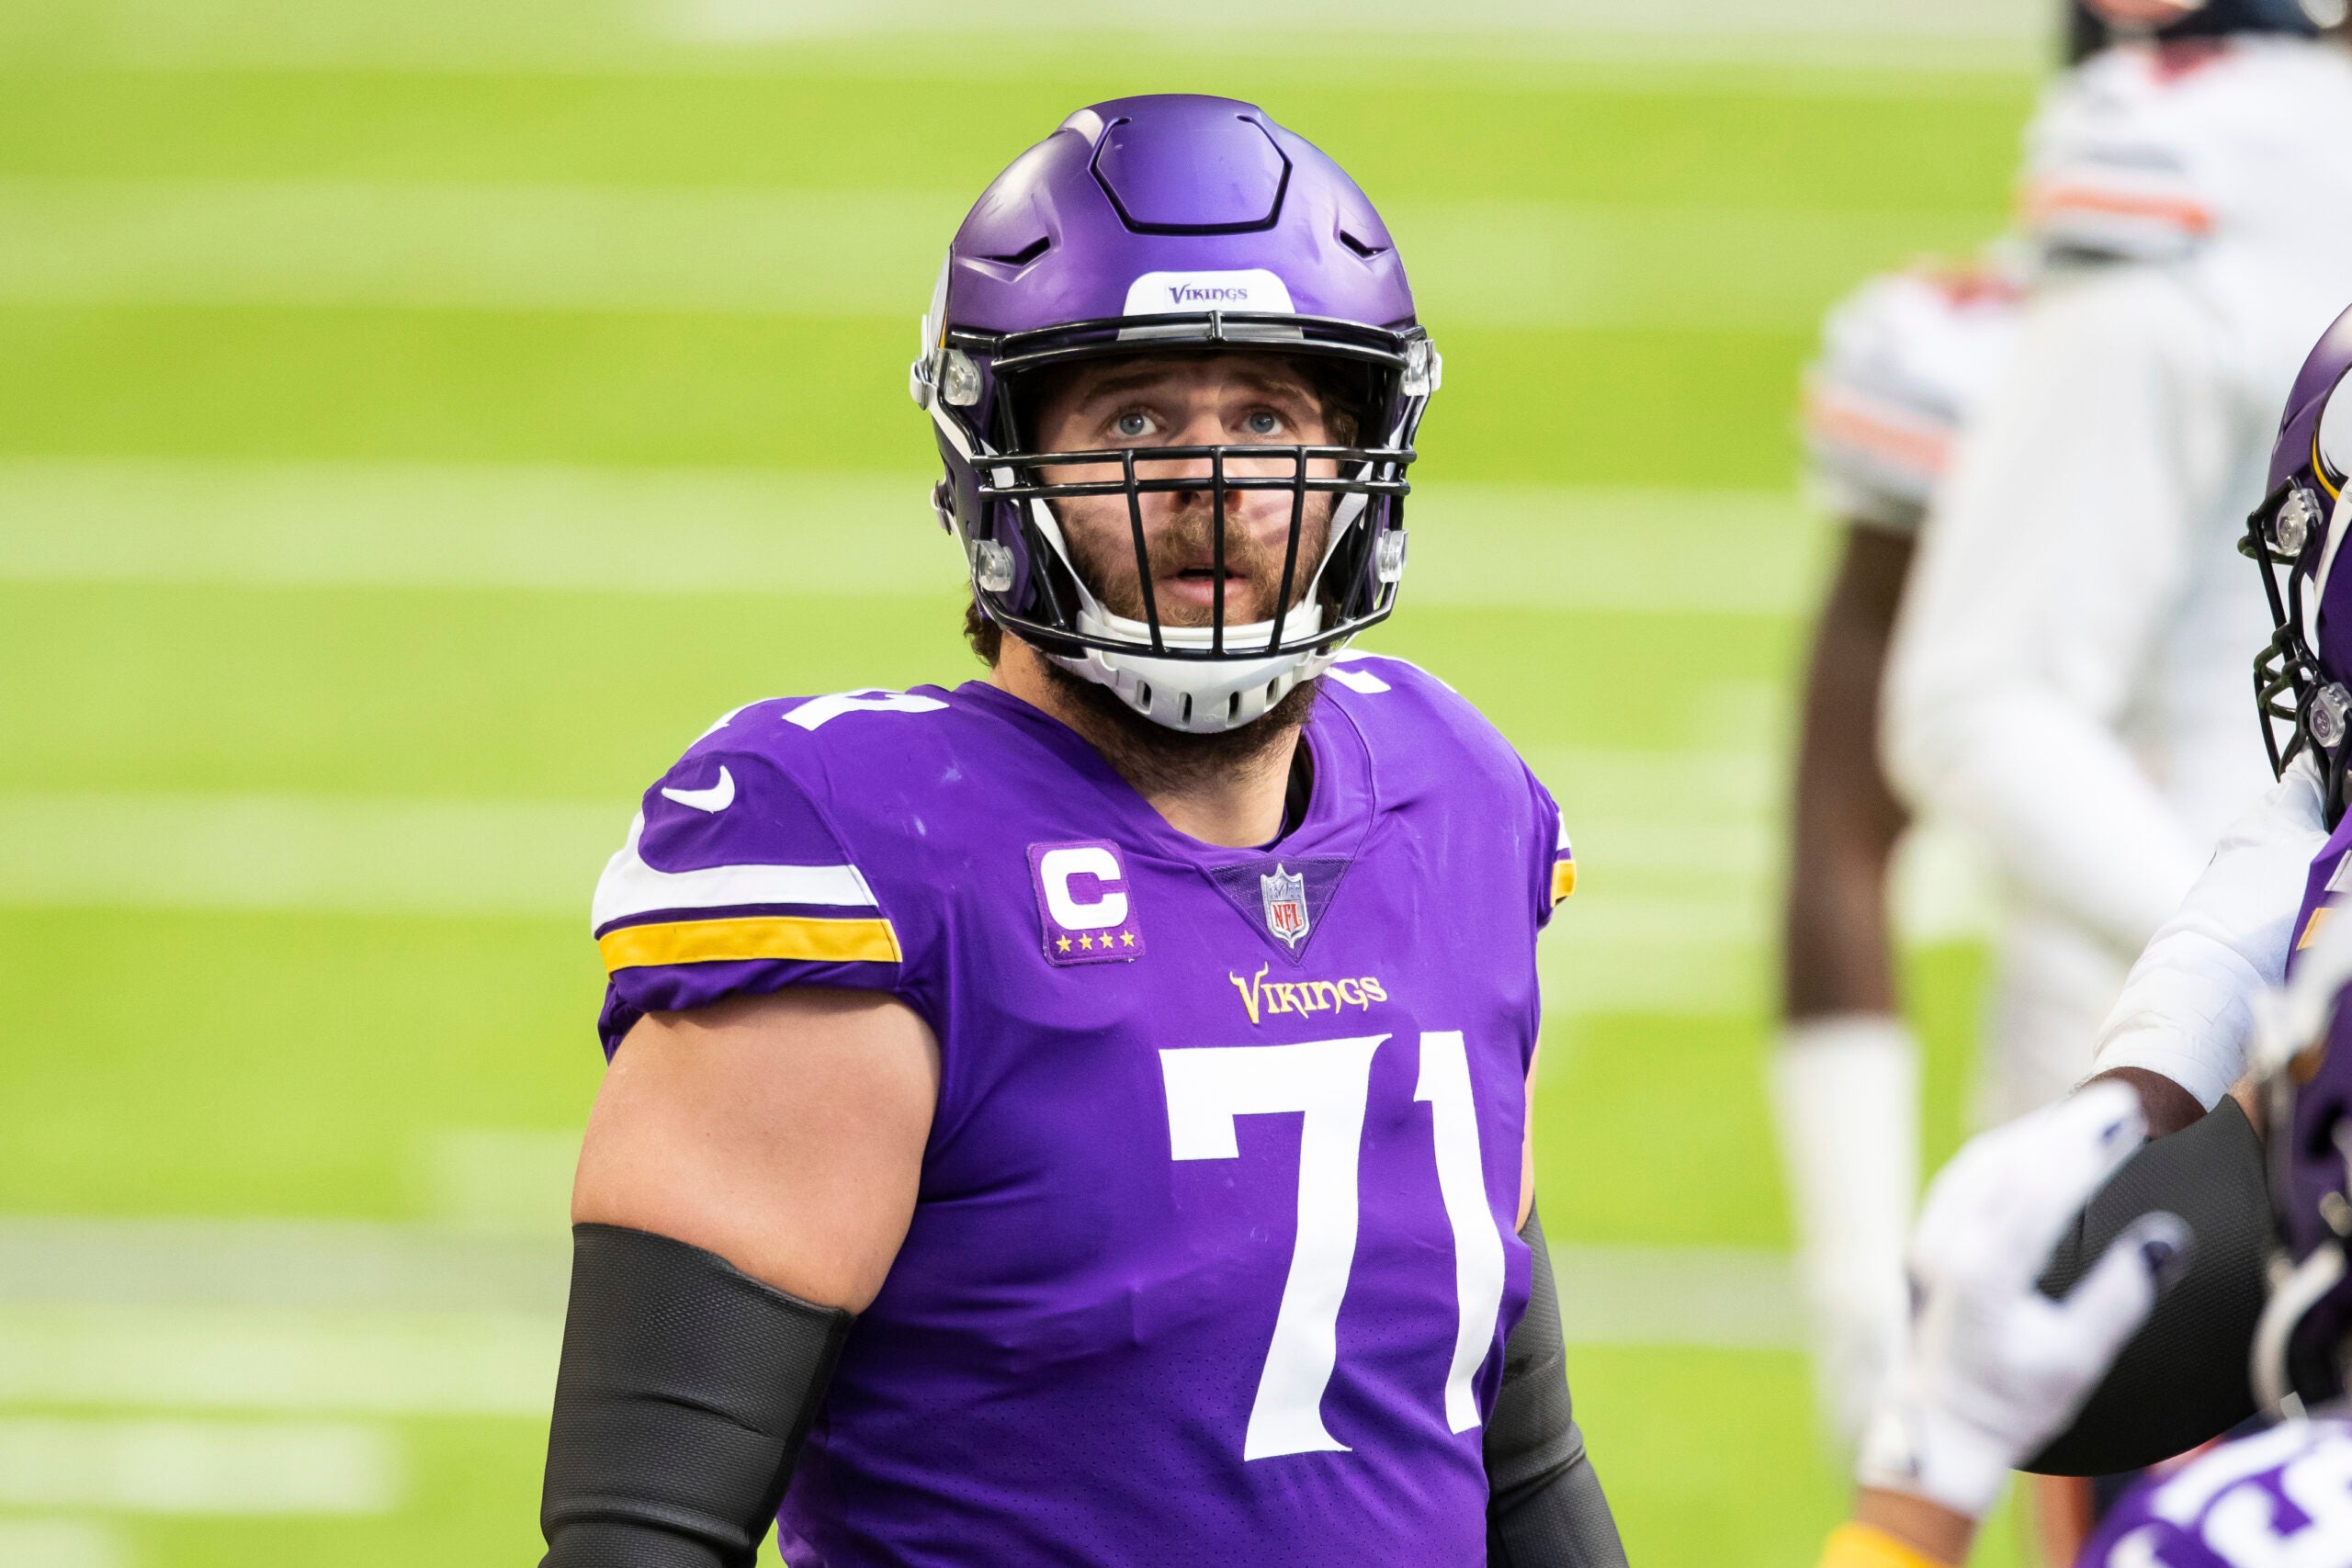 Minnesota Vikings offensive tackle Riley Reiff (71) looks on in the first quarter during an NFL football game against the Chicago Bears.